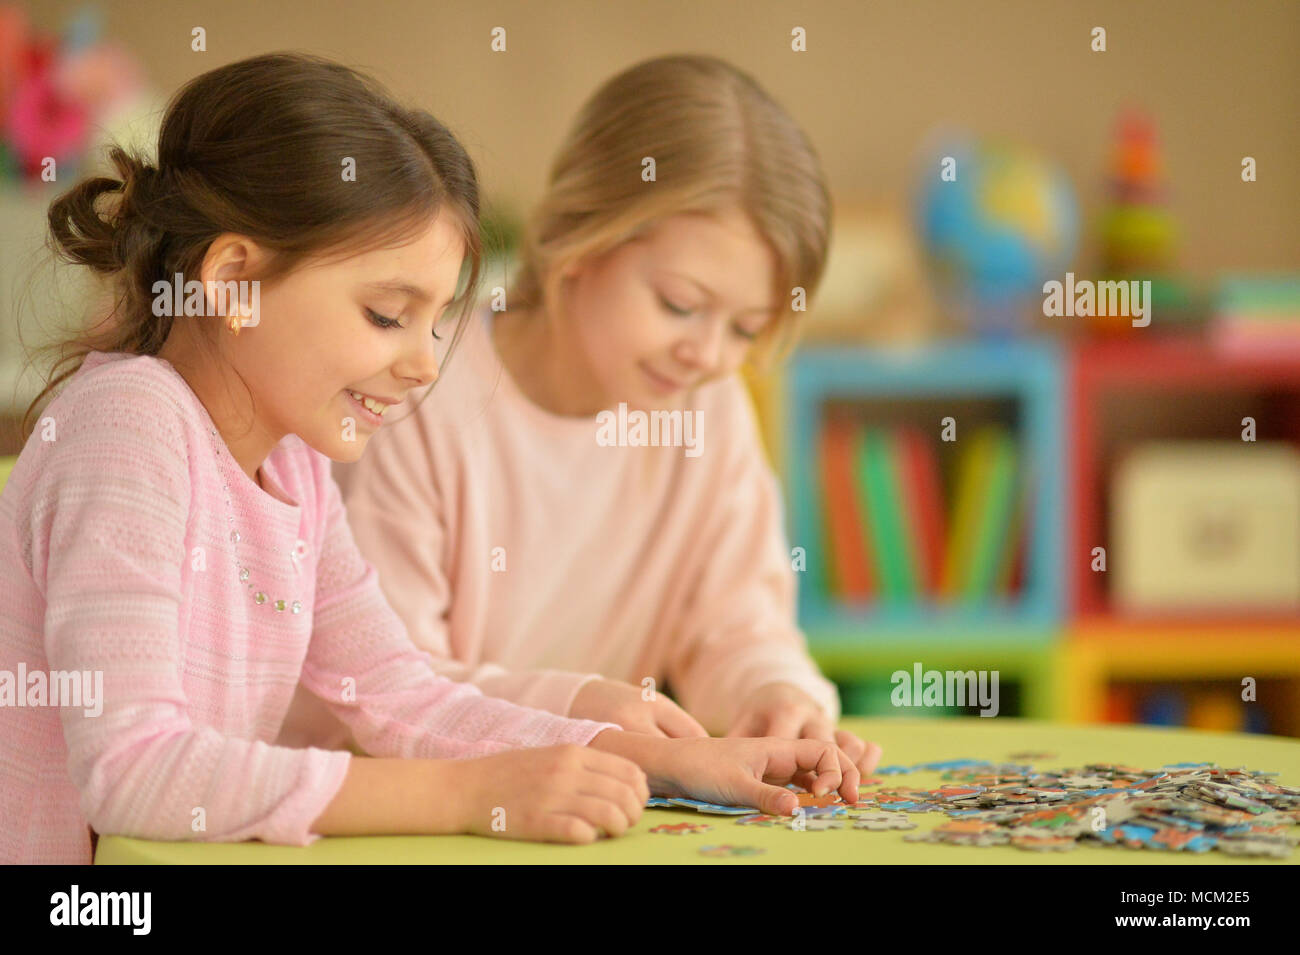 Girls collecting puzzles Stock Photo